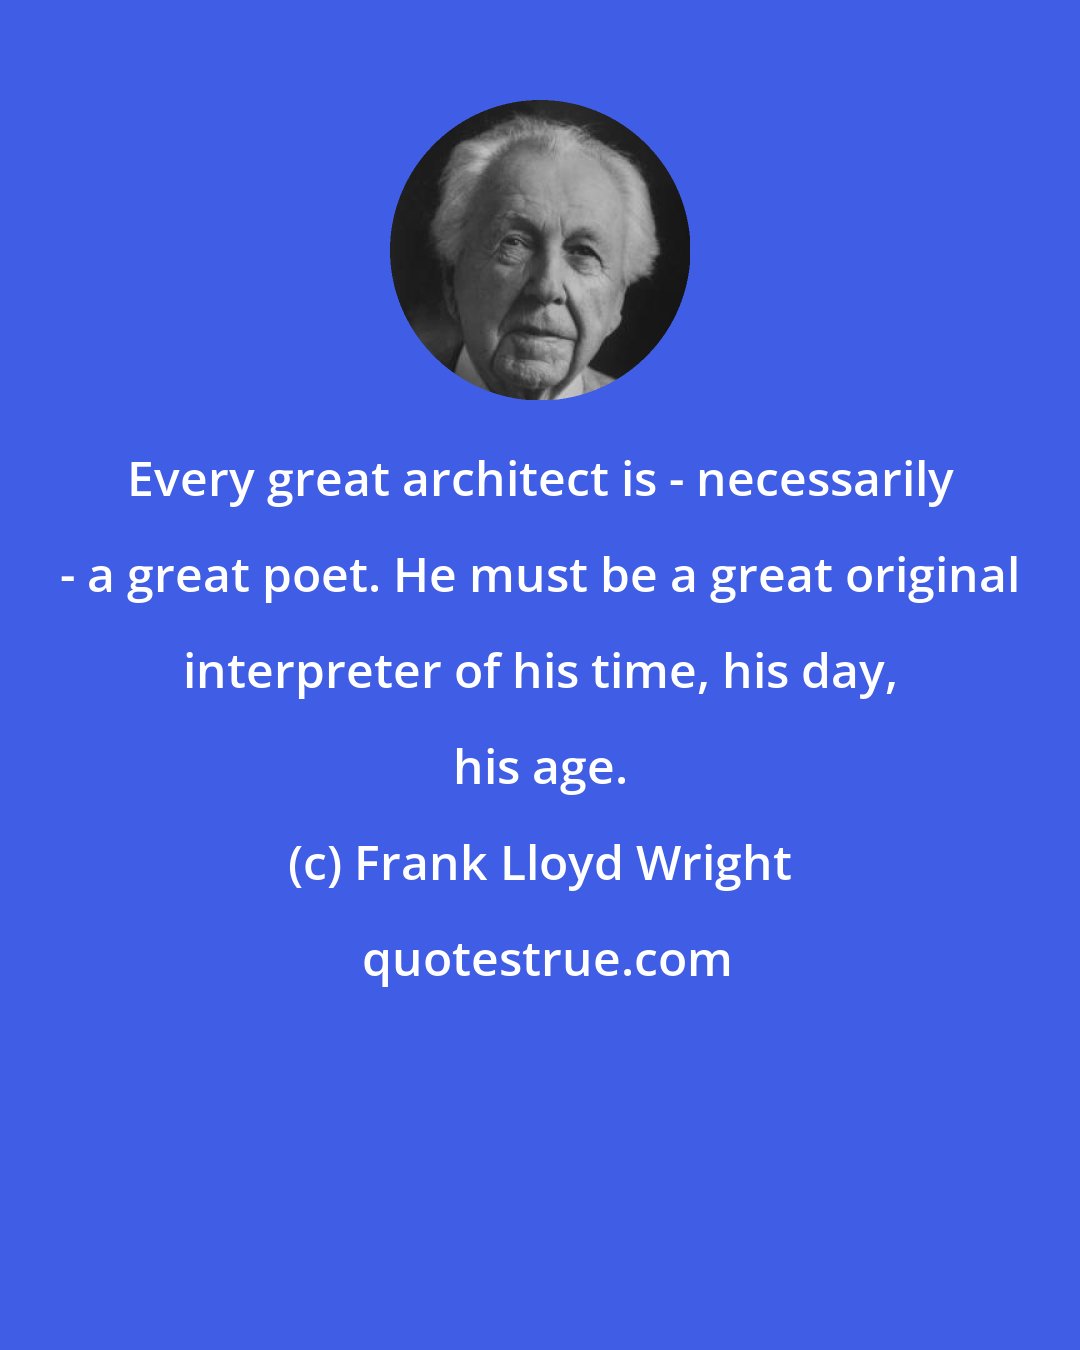 Frank Lloyd Wright: Every great architect is - necessarily - a great poet. He must be a great original interpreter of his time, his day, his age.